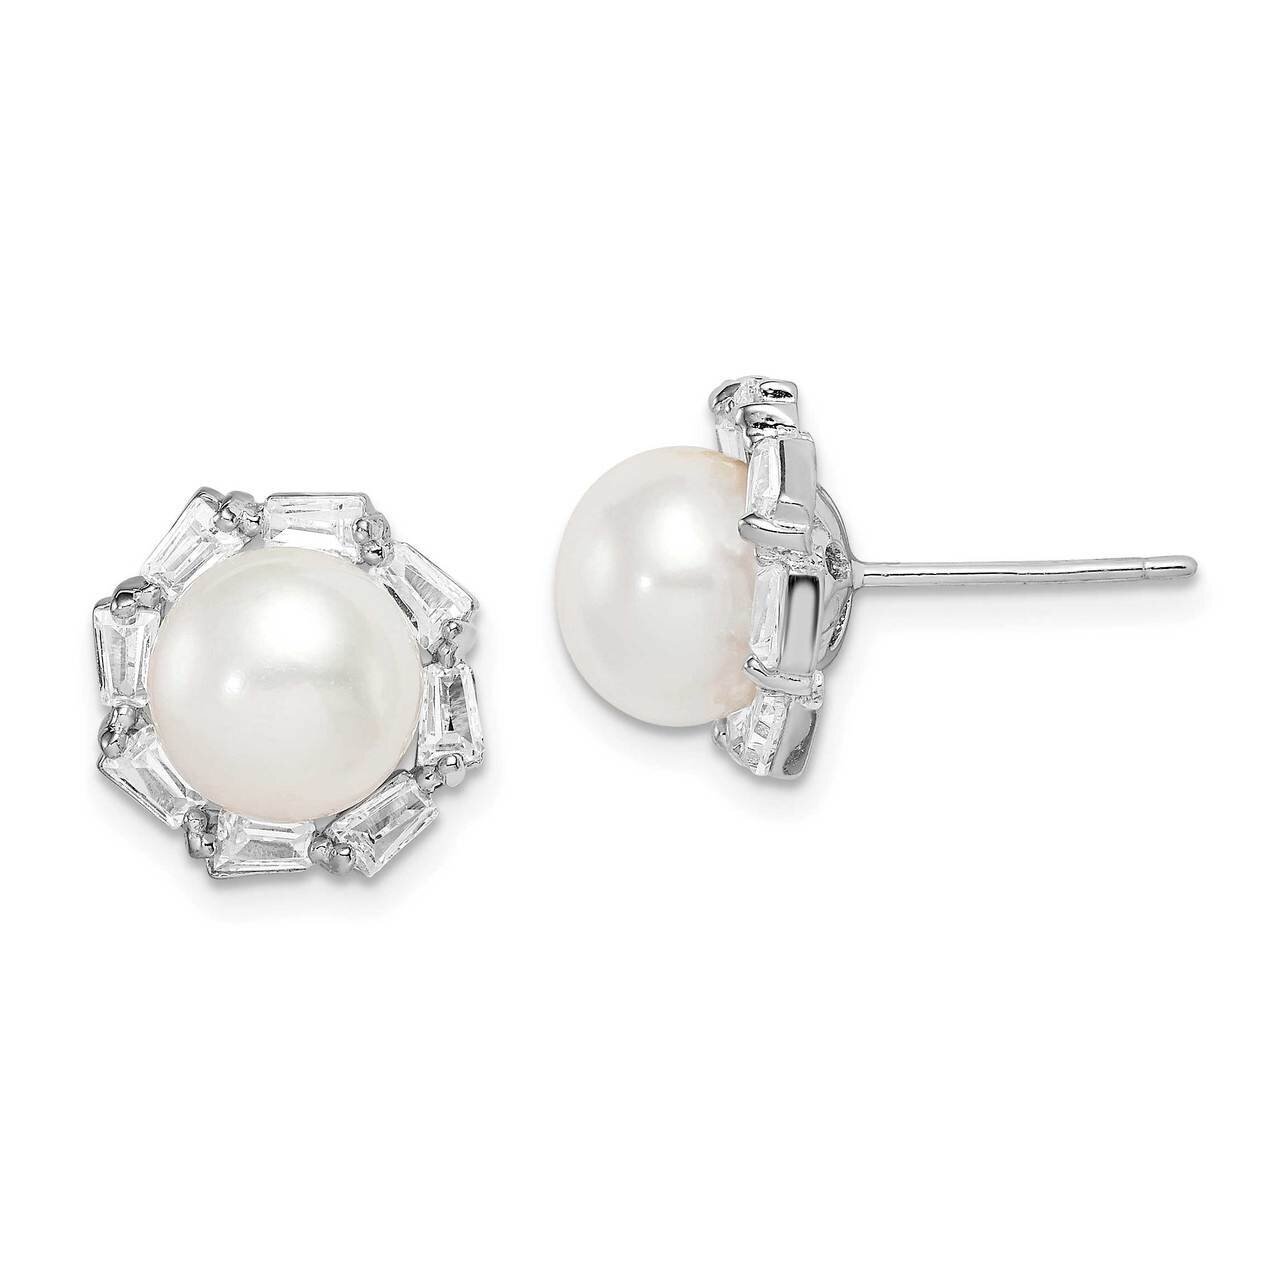 8-9mm White Button Freshwater Cultured Pearl CZ Diamond Earrings Sterling Silver Rhodium Plated QE15267